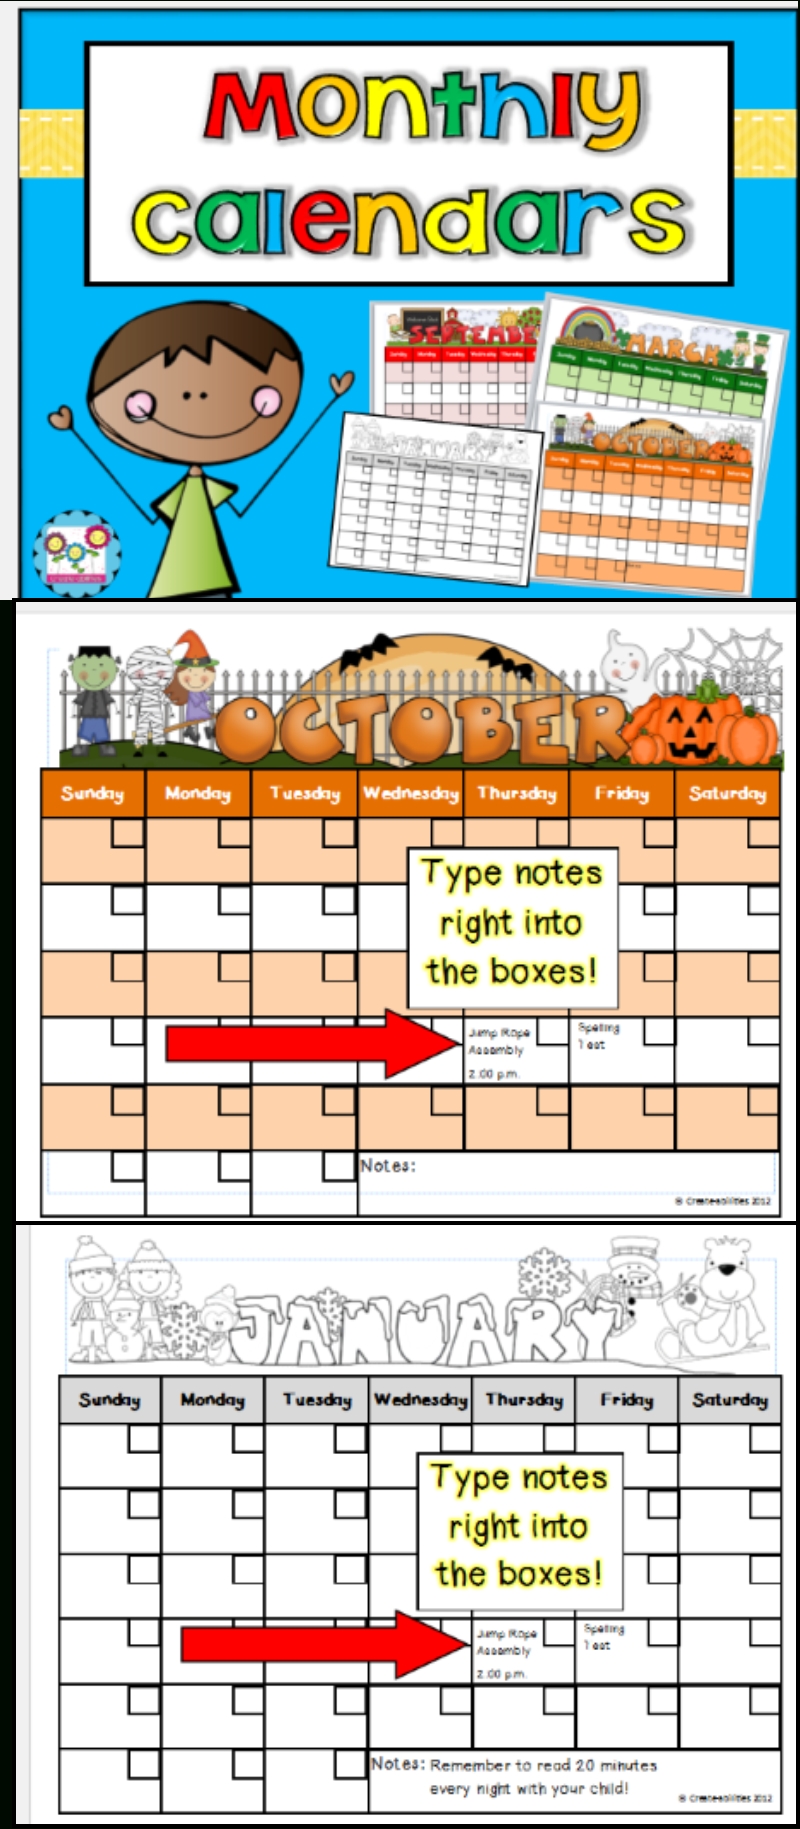 Monthly Calendar Templates Editable | Create-Abilities Tpt Store Calendar Template You Can Type In